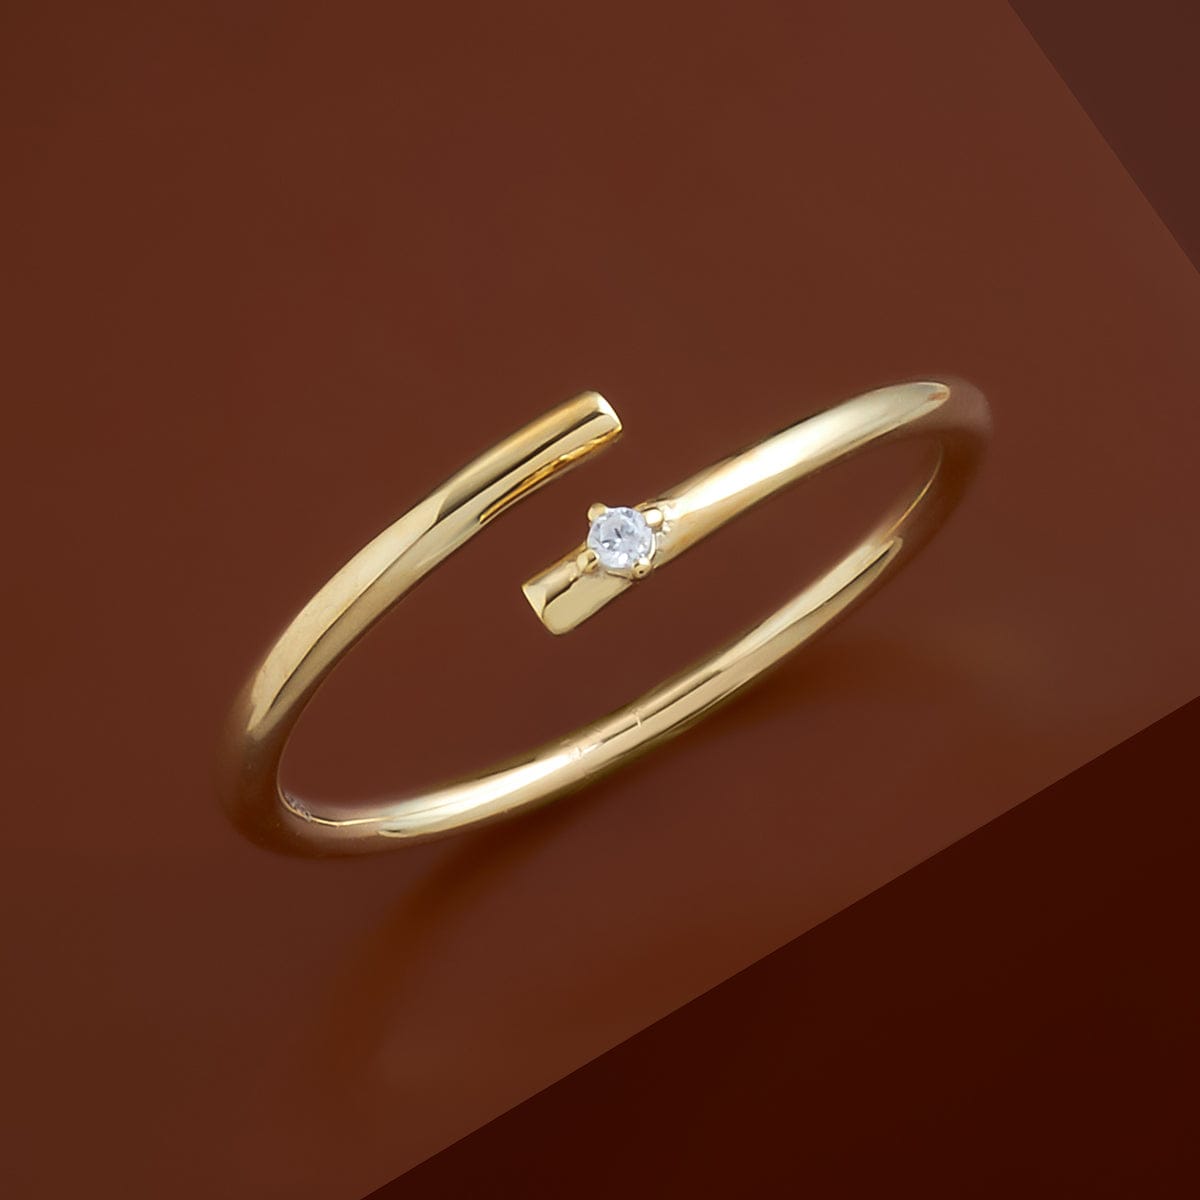 Stratura Wave Wedding Ring in Gold without stone | MYEL Design